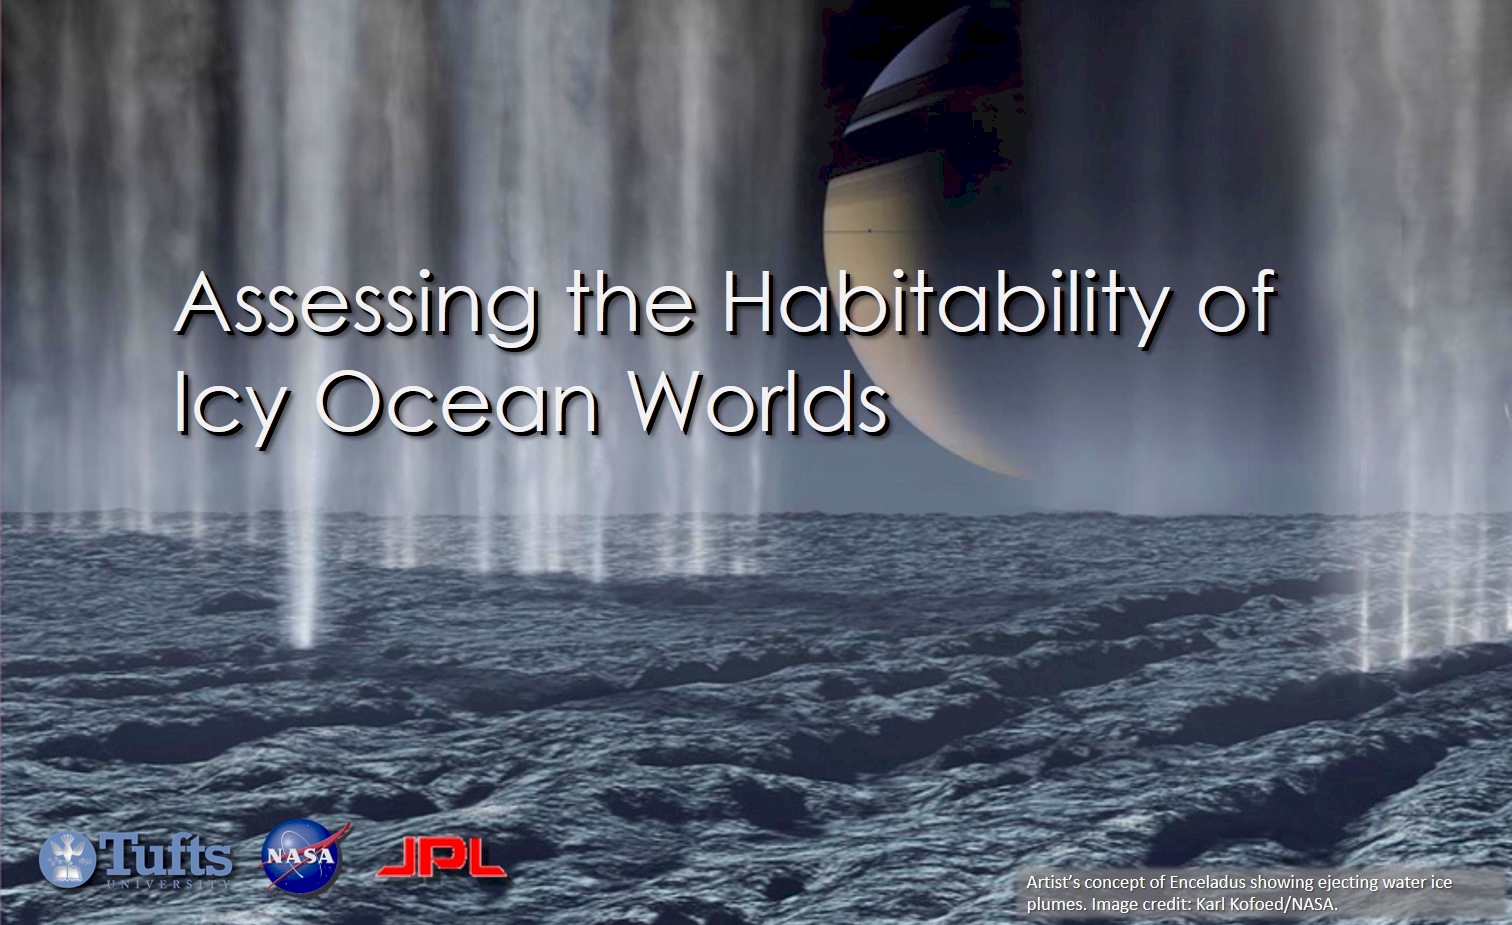 Assessing the Habitability of Icy Ocean Worlds